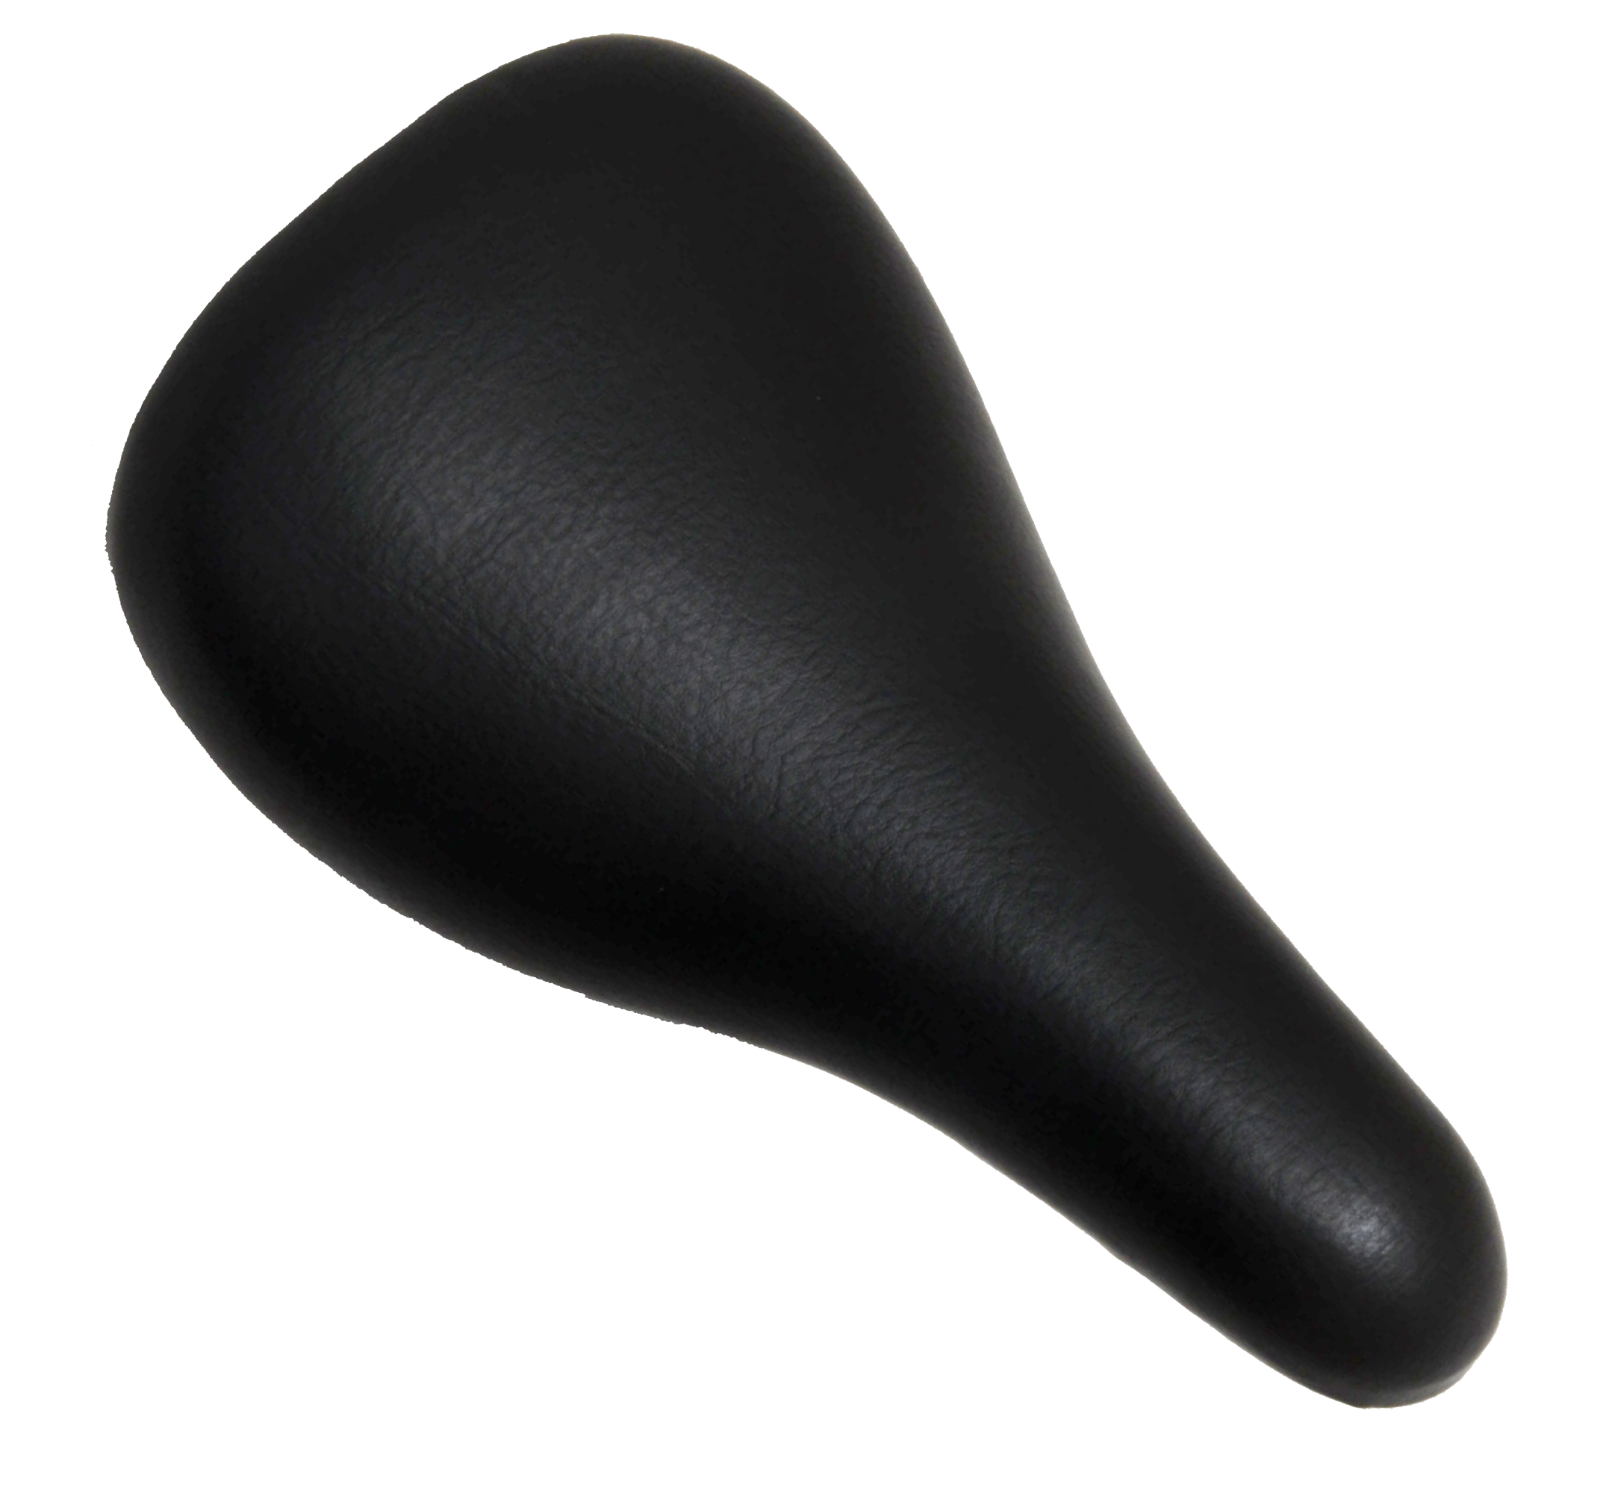 DK Conductor Two Piece Padded BMX Saddle With 25.4mm (1") Seatpost - Sportandleisure.com (6968090722458)